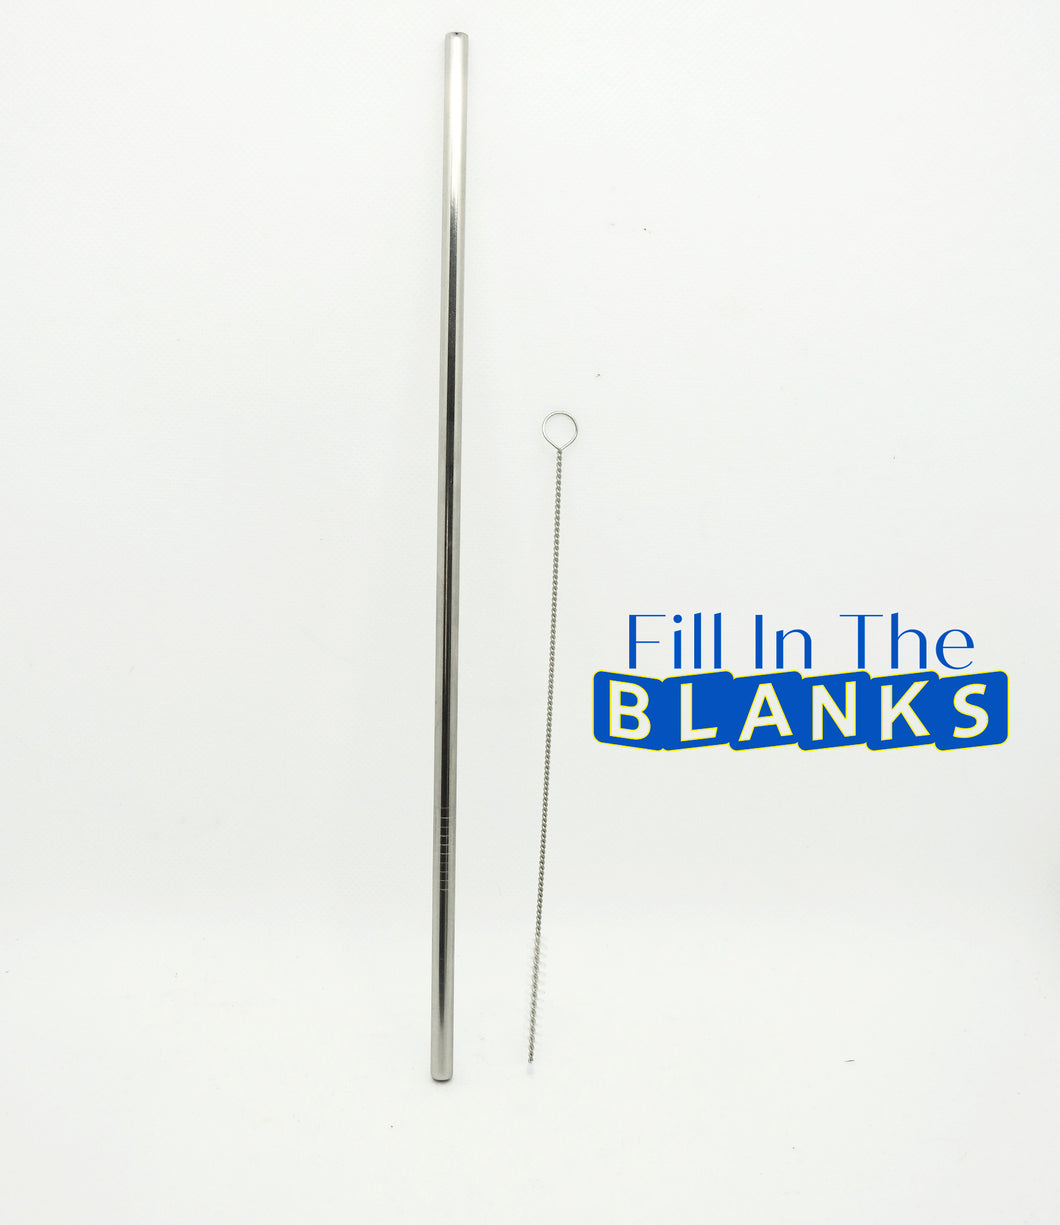 Stainless Steel Straw and Straw Cleaner (sold separately)